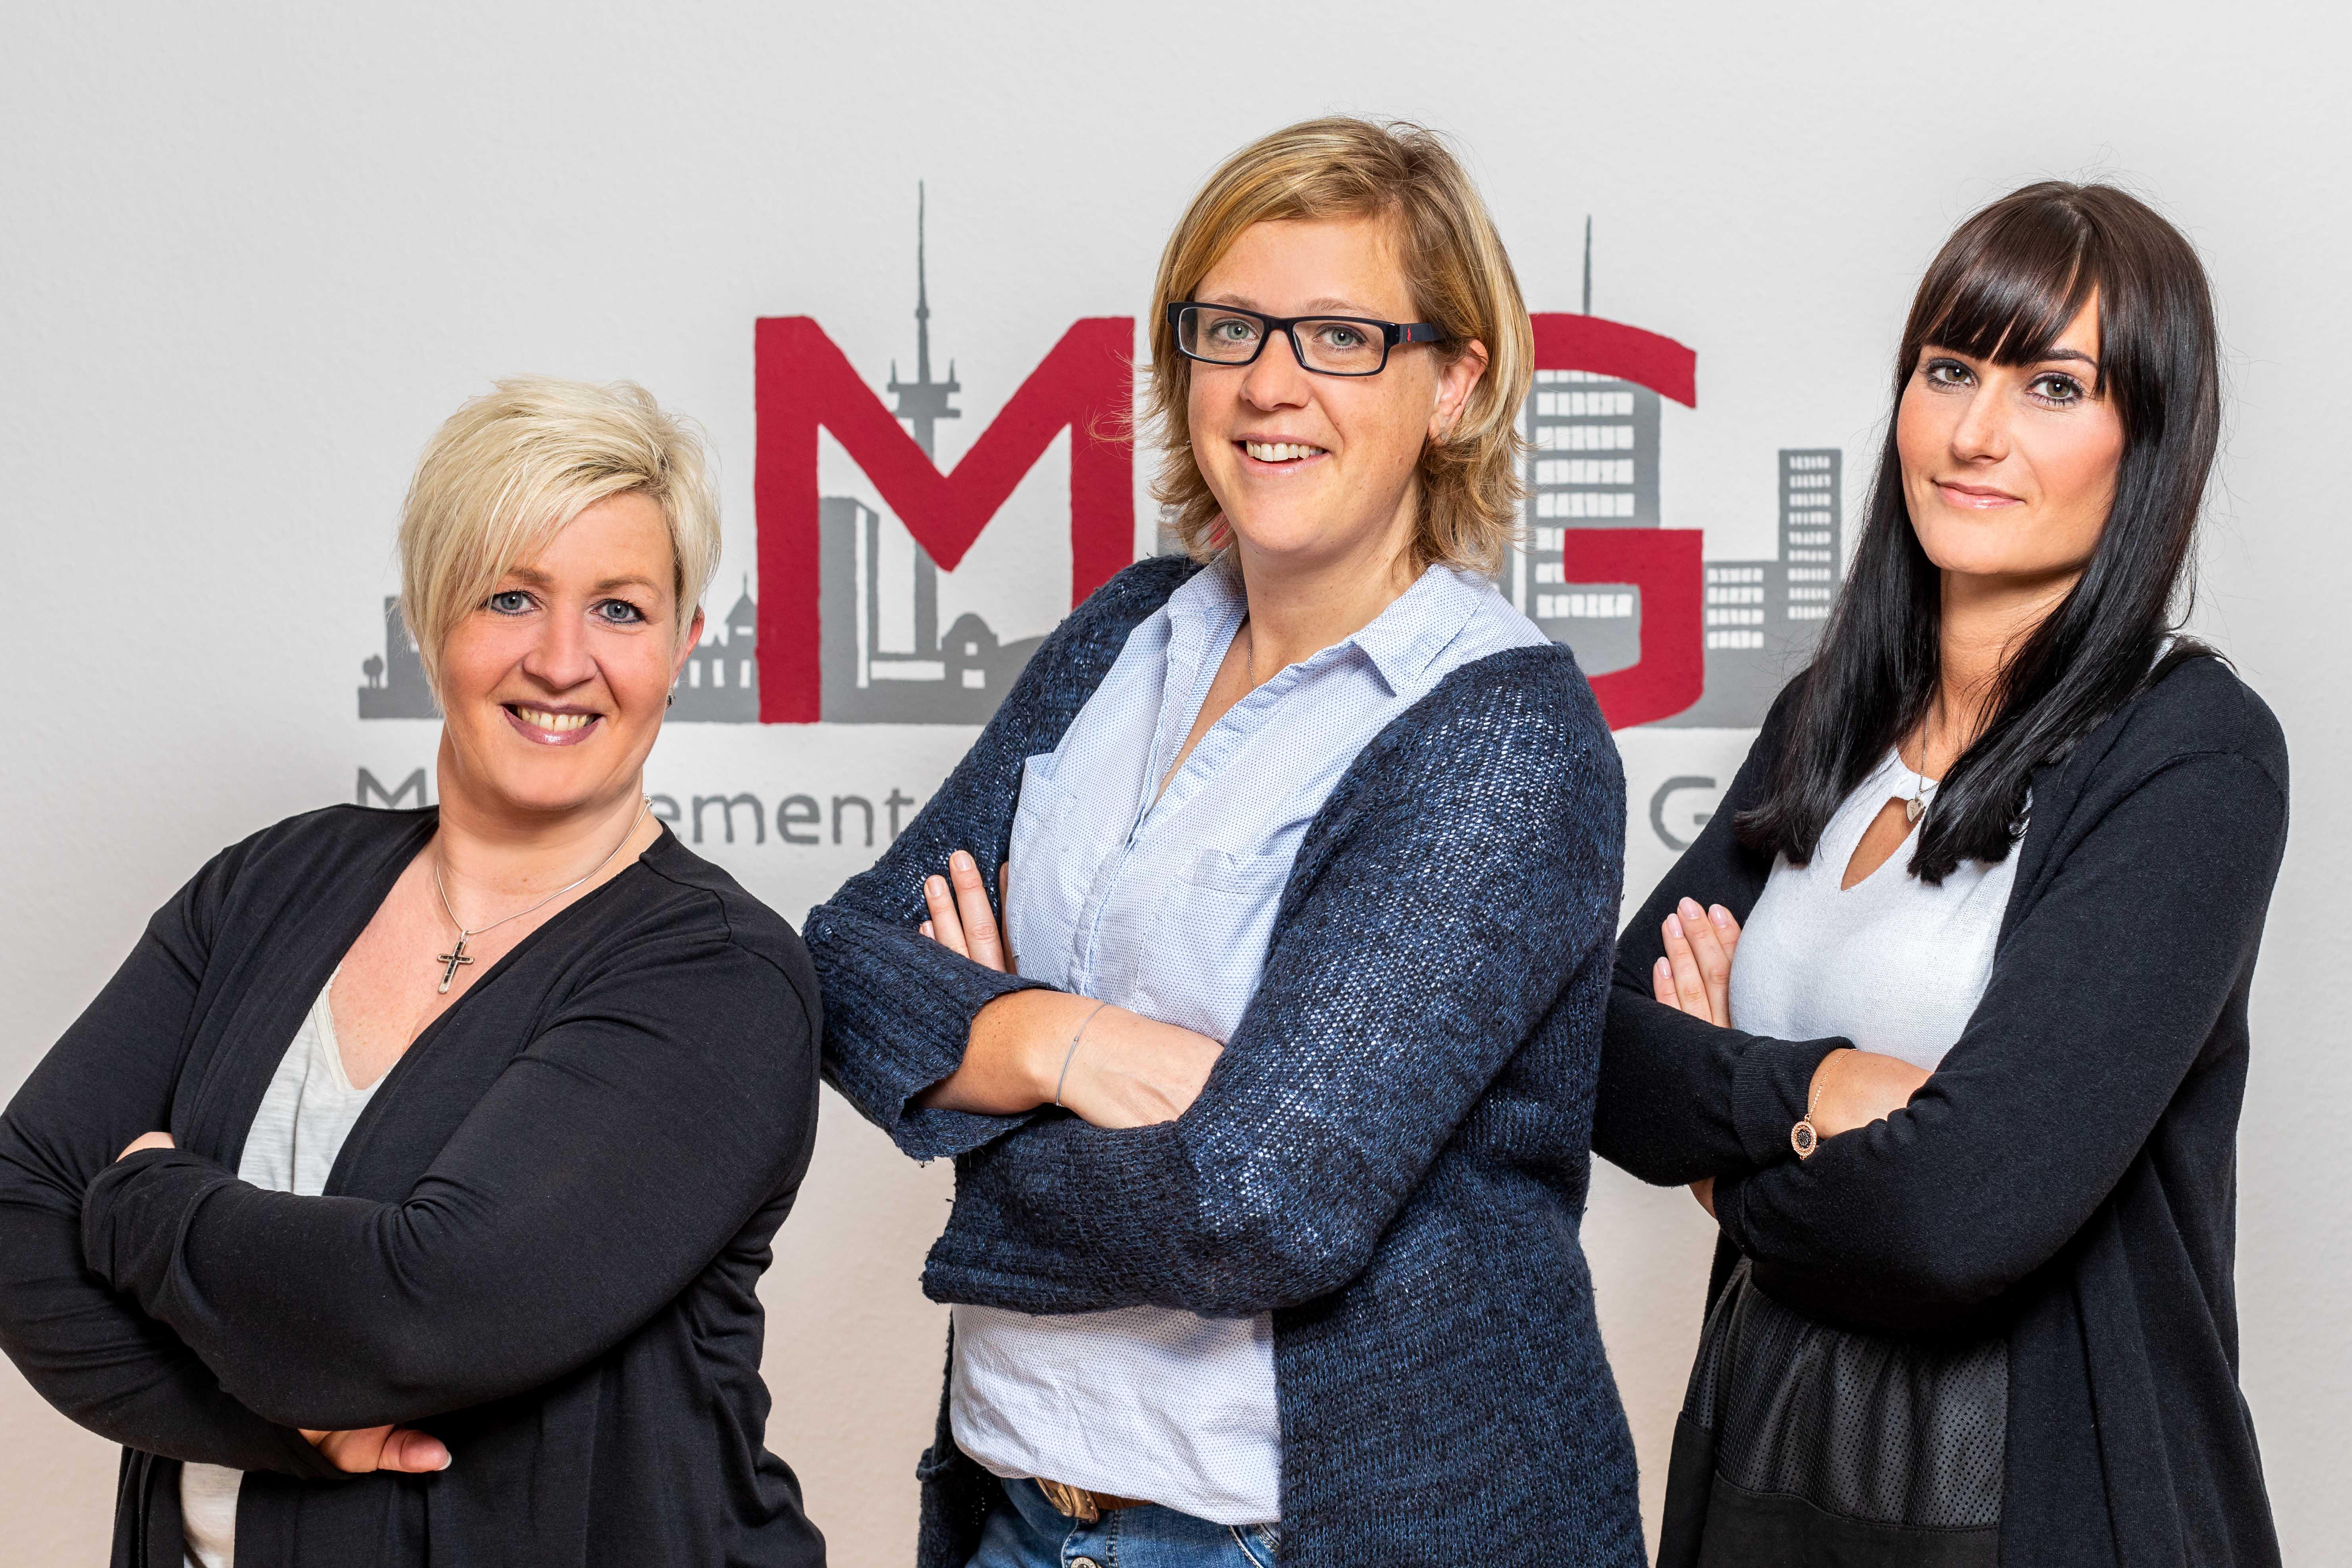 MiG Immobilien GmbH